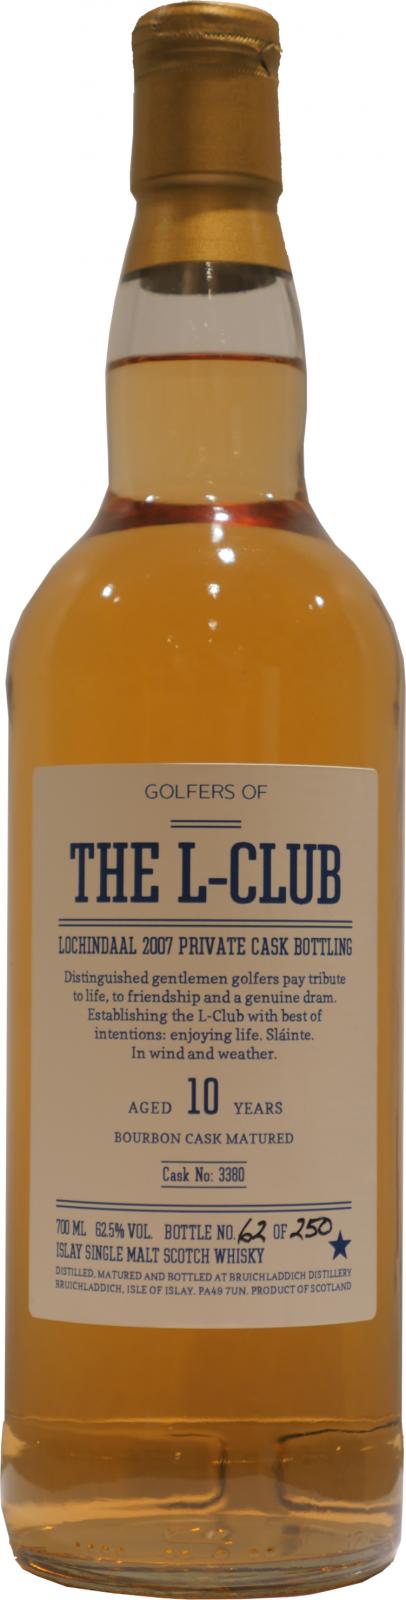 Lochindaal 2007 Private Cask Bottling #3380 The L-Club 62.5% 700ml